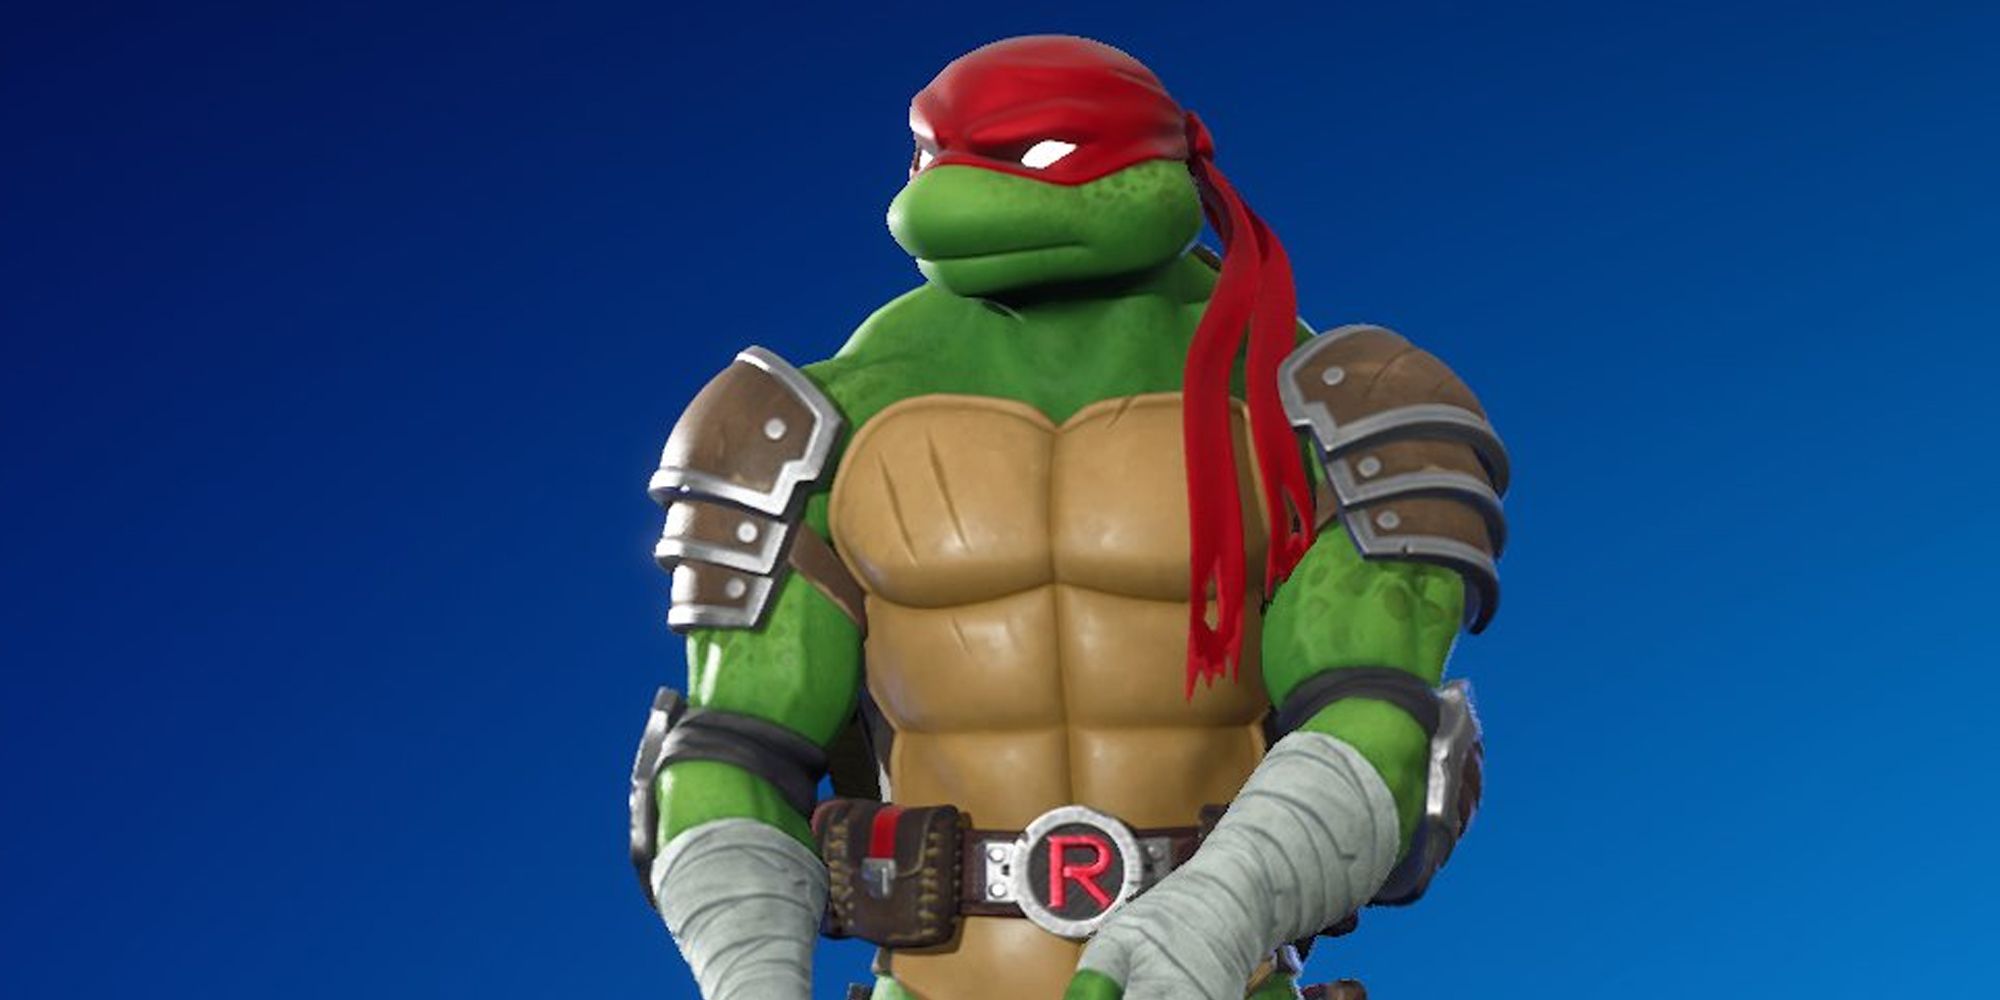 Teenage Mutant Ninja Turtle Raphael in Fortnite over a blue background with shoulder pads and bandaged arms